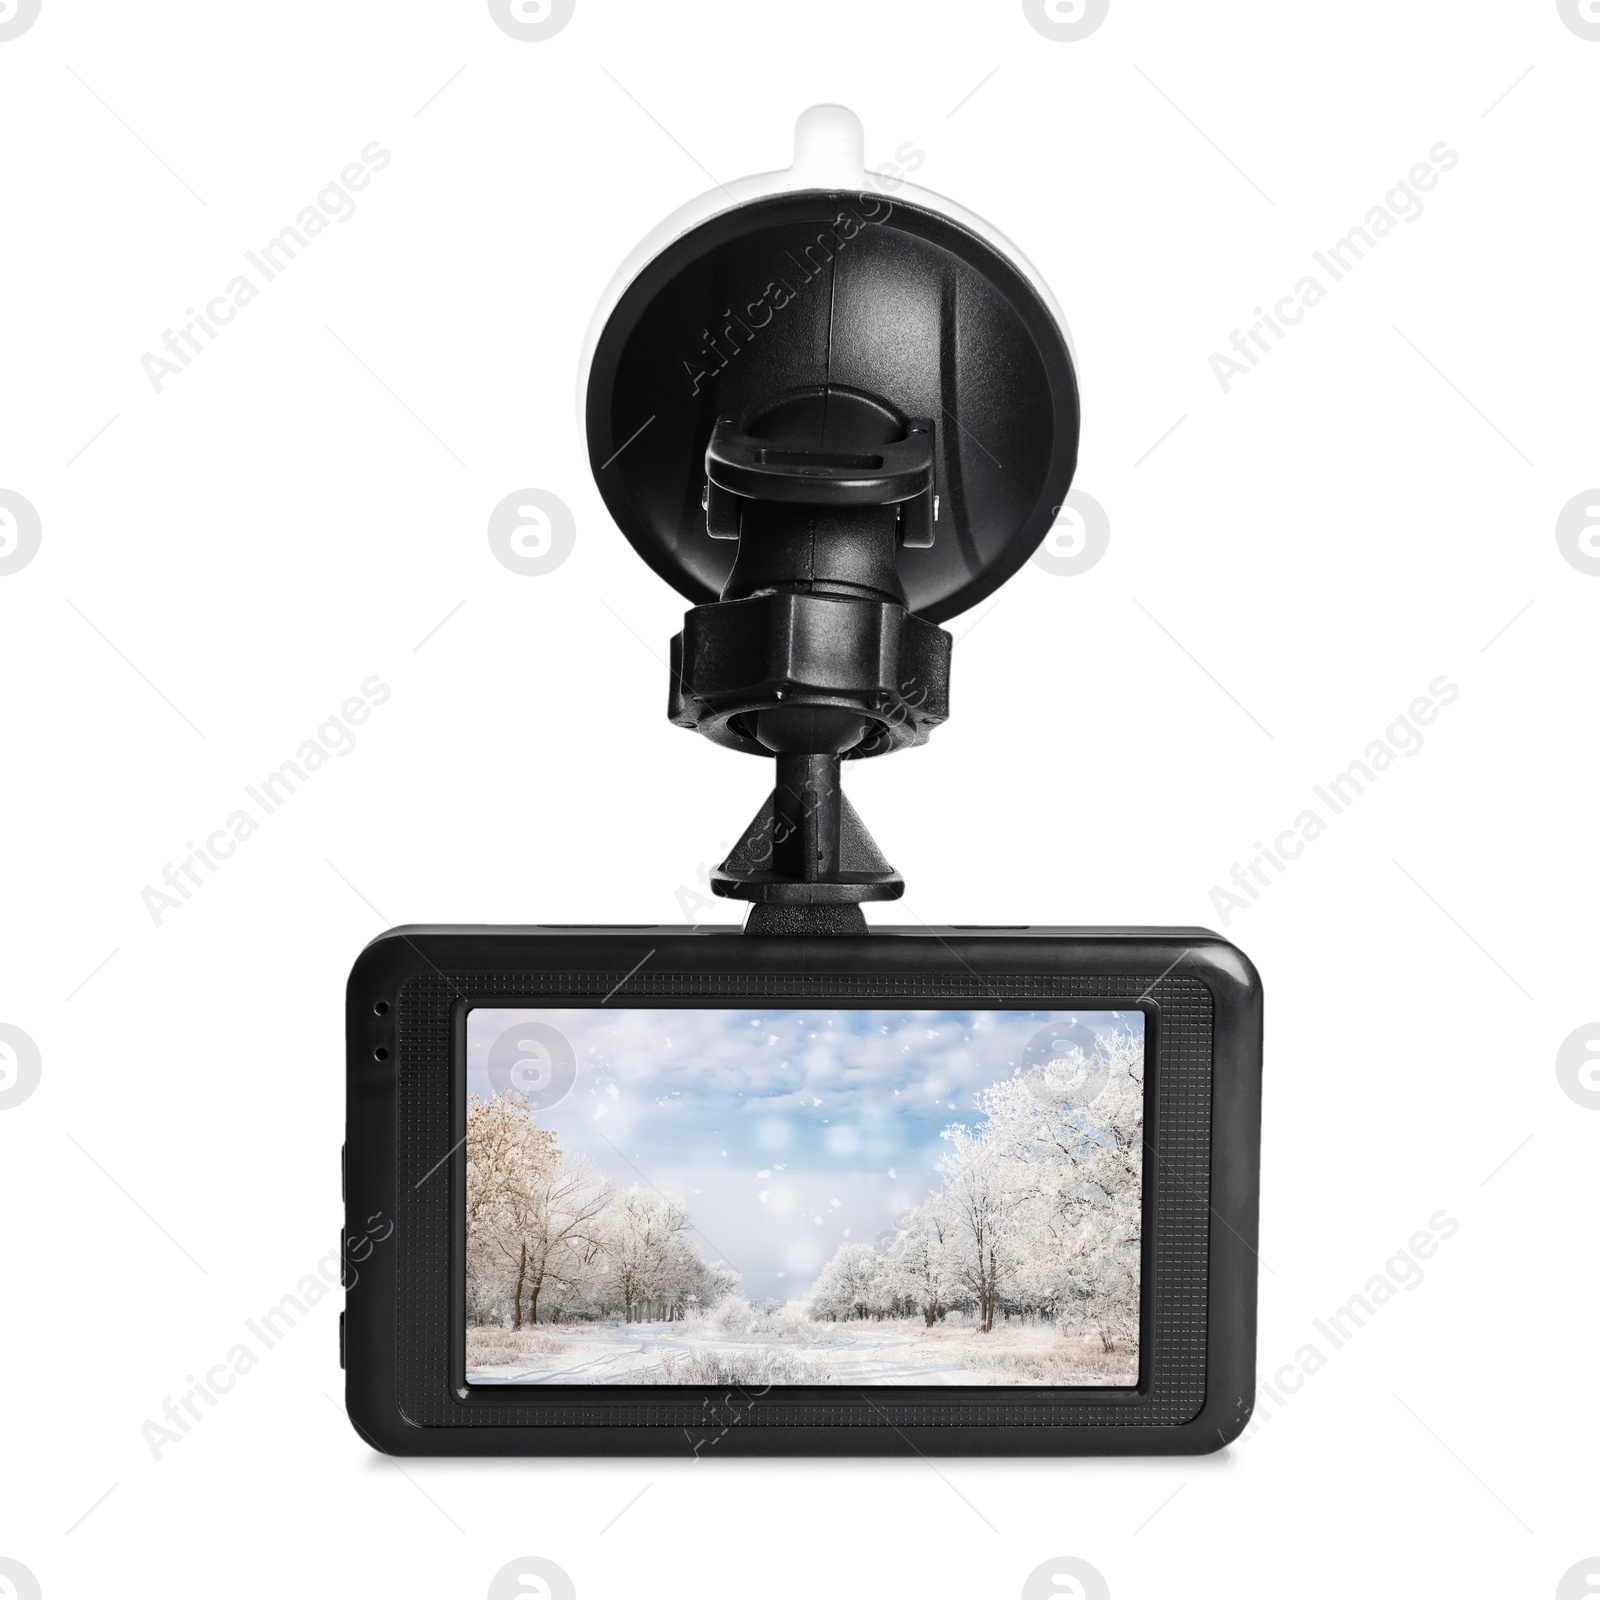 Image of Modern car dashboard camera with photo of snowy road on screen against white background